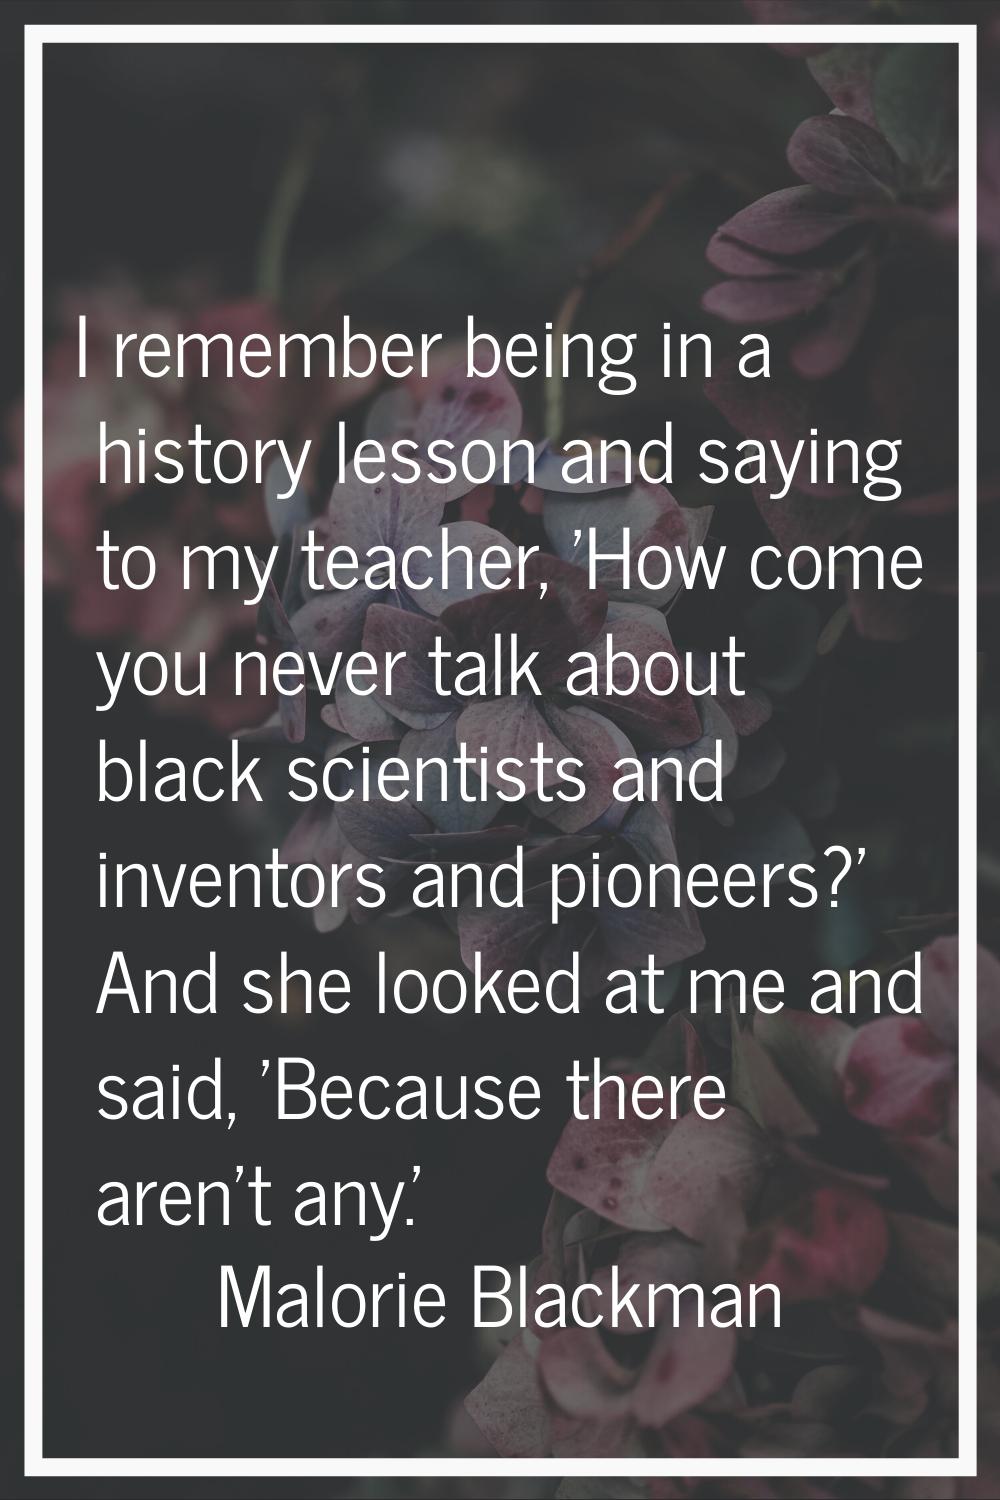 I remember being in a history lesson and saying to my teacher, 'How come you never talk about black